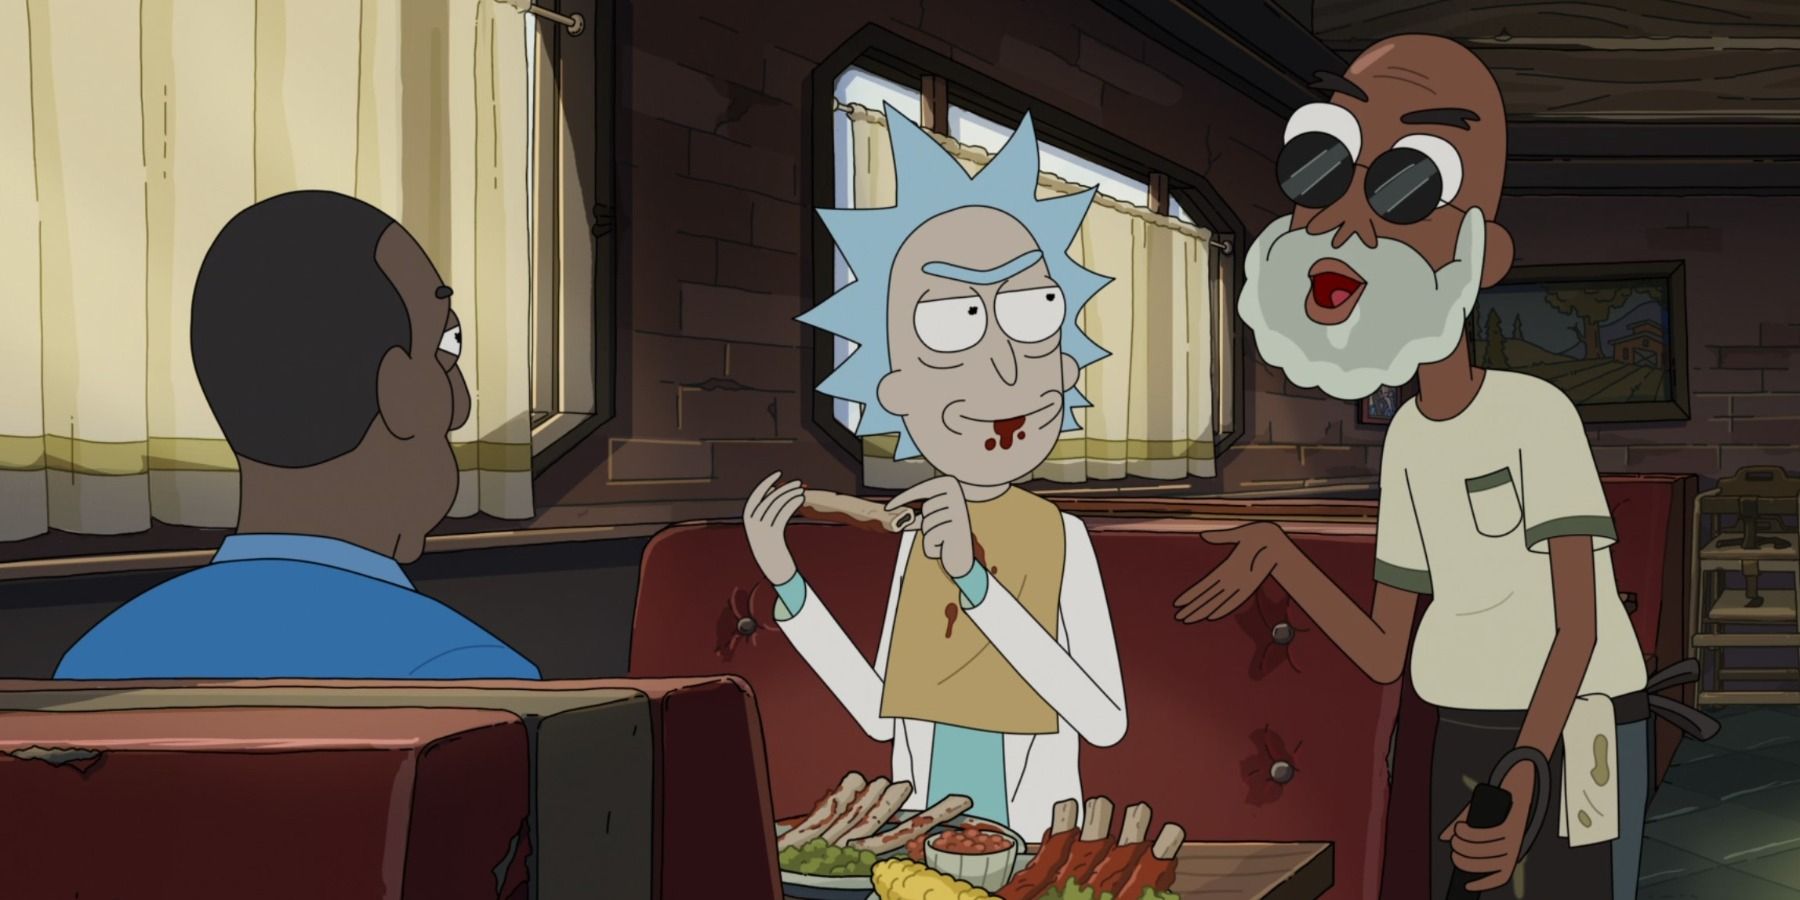 Rick and Morty House of Cards barbeque scene